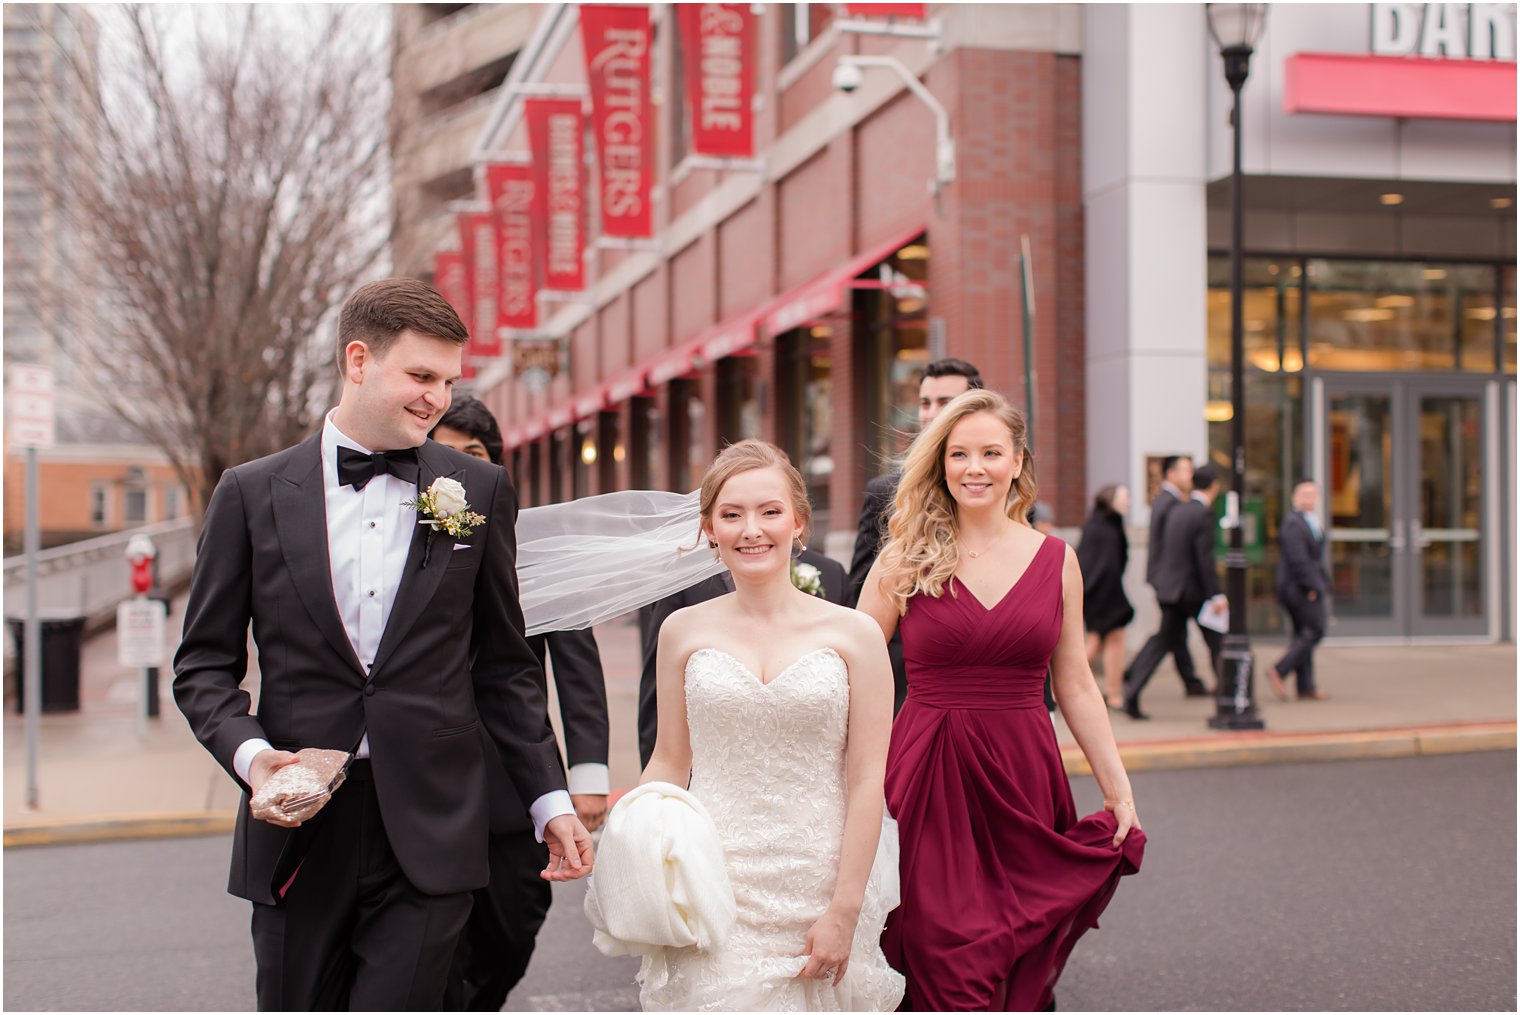 Candid photo of bride and groom walking in downtown New Brunswick NJ